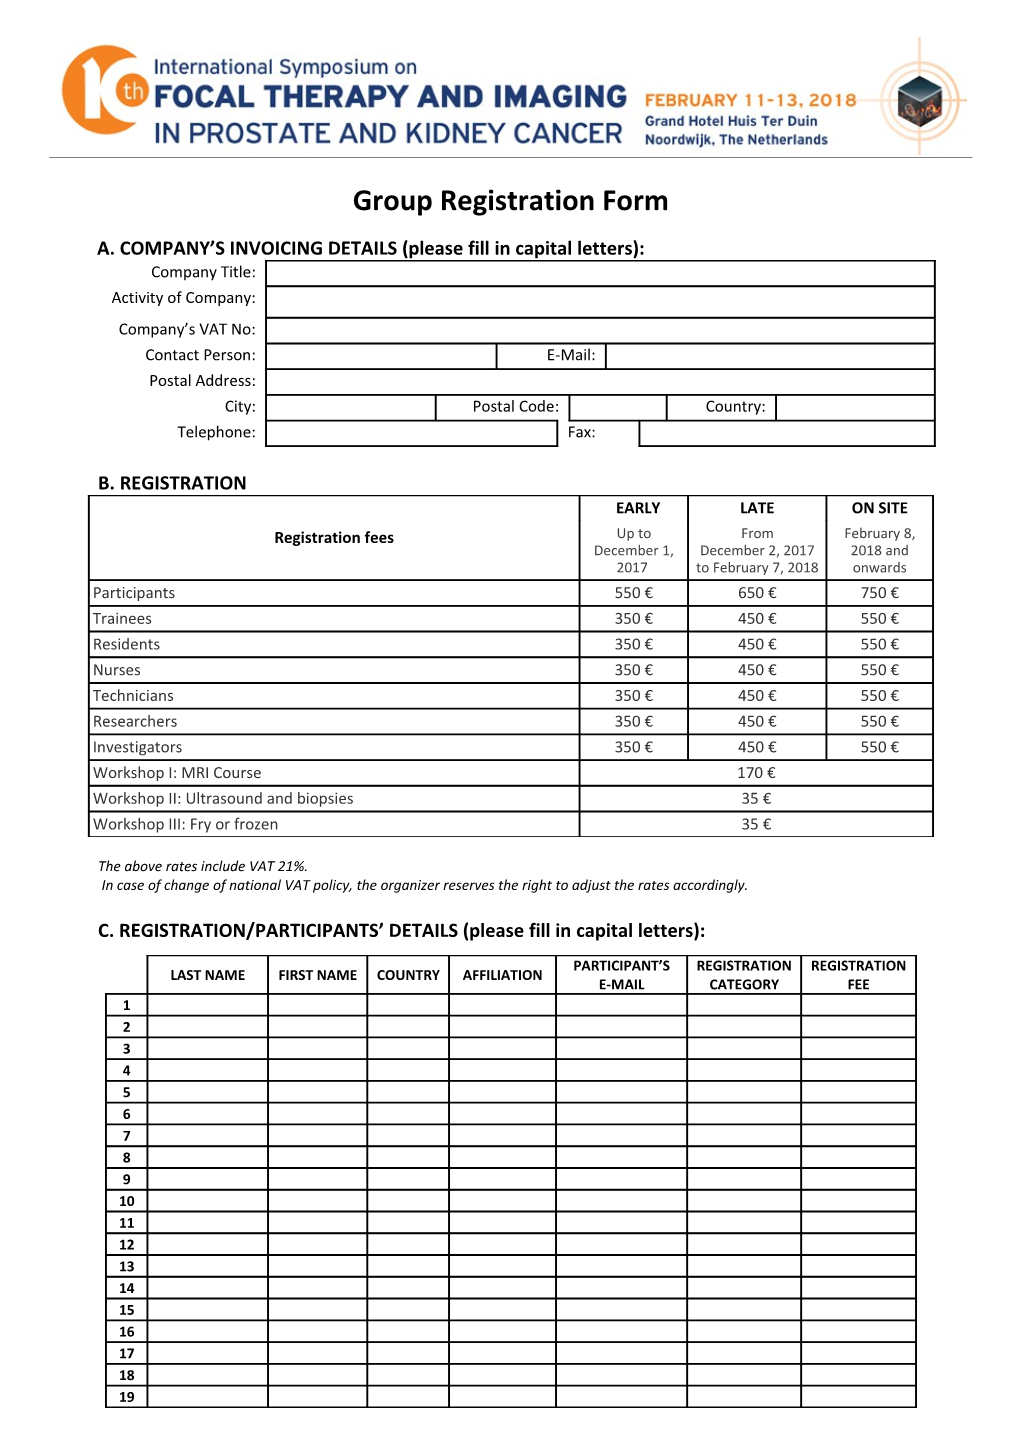 A. COMPANY S INVOICING DETAILS (Please Fill in Capital Letters)